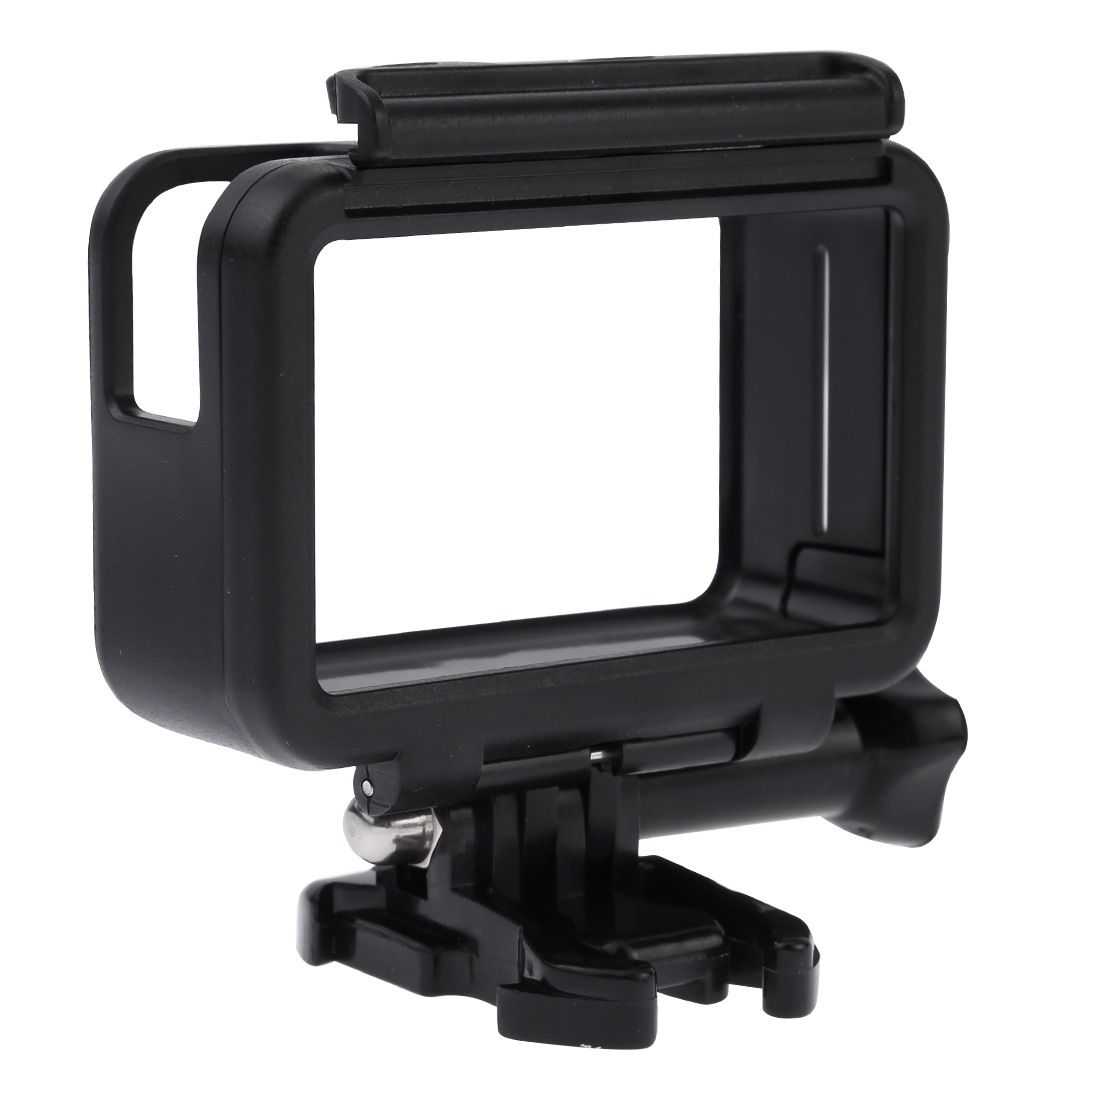 PULUZ-PU338B-Protective-Frame-Shell-Case-for-DJI-OSMO-Action-Sports-Camera-1570538